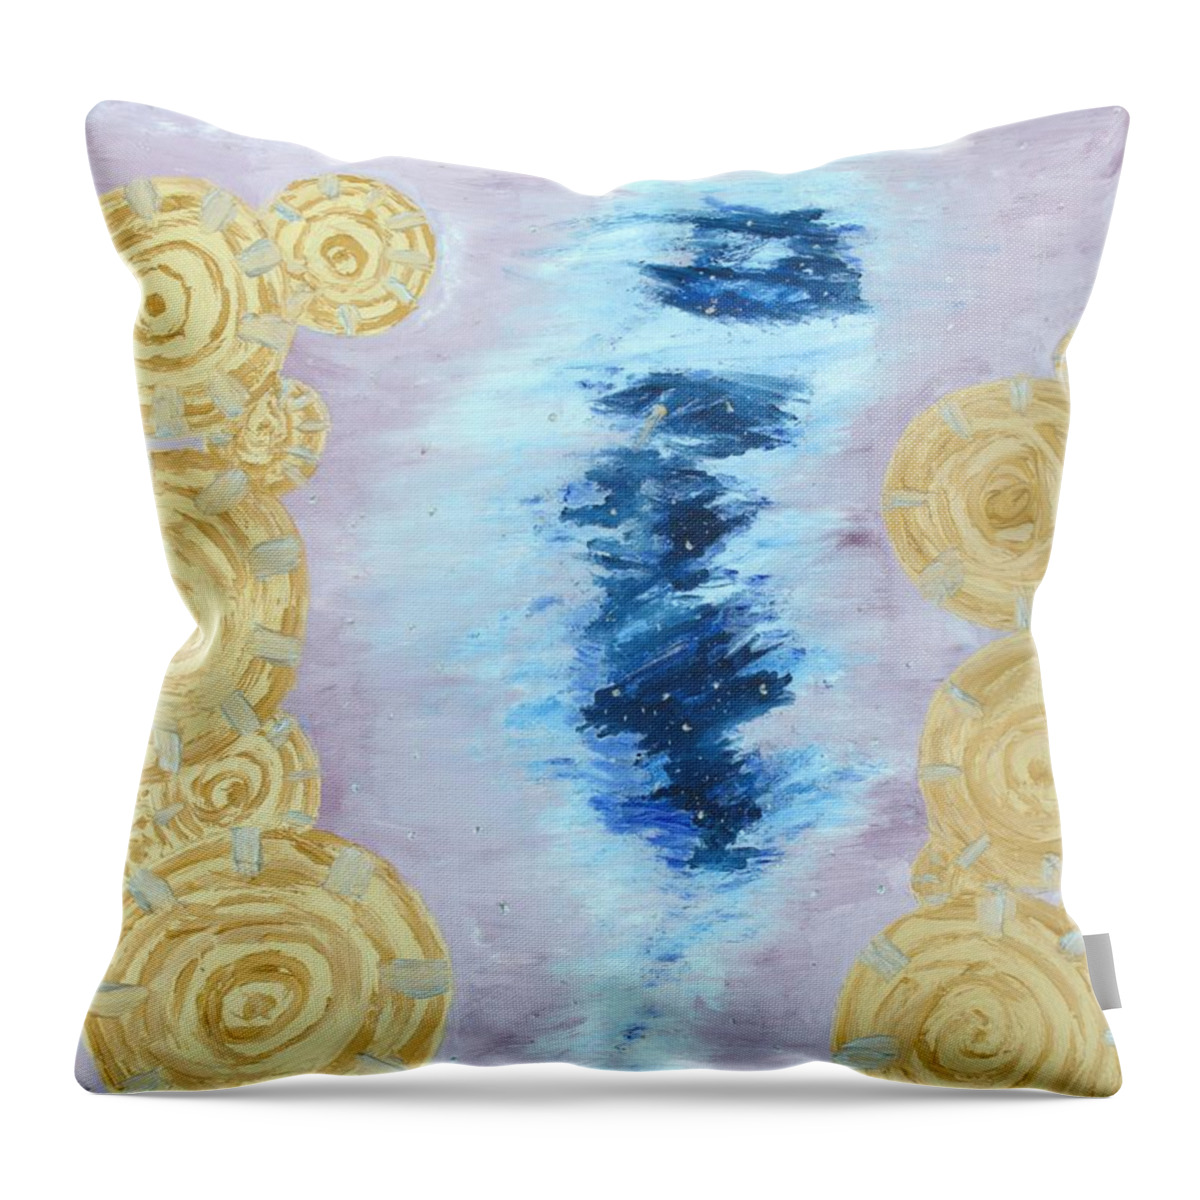 Inspired Works Of Art Throw Pillow featuring the painting Travelling by Christina Knight